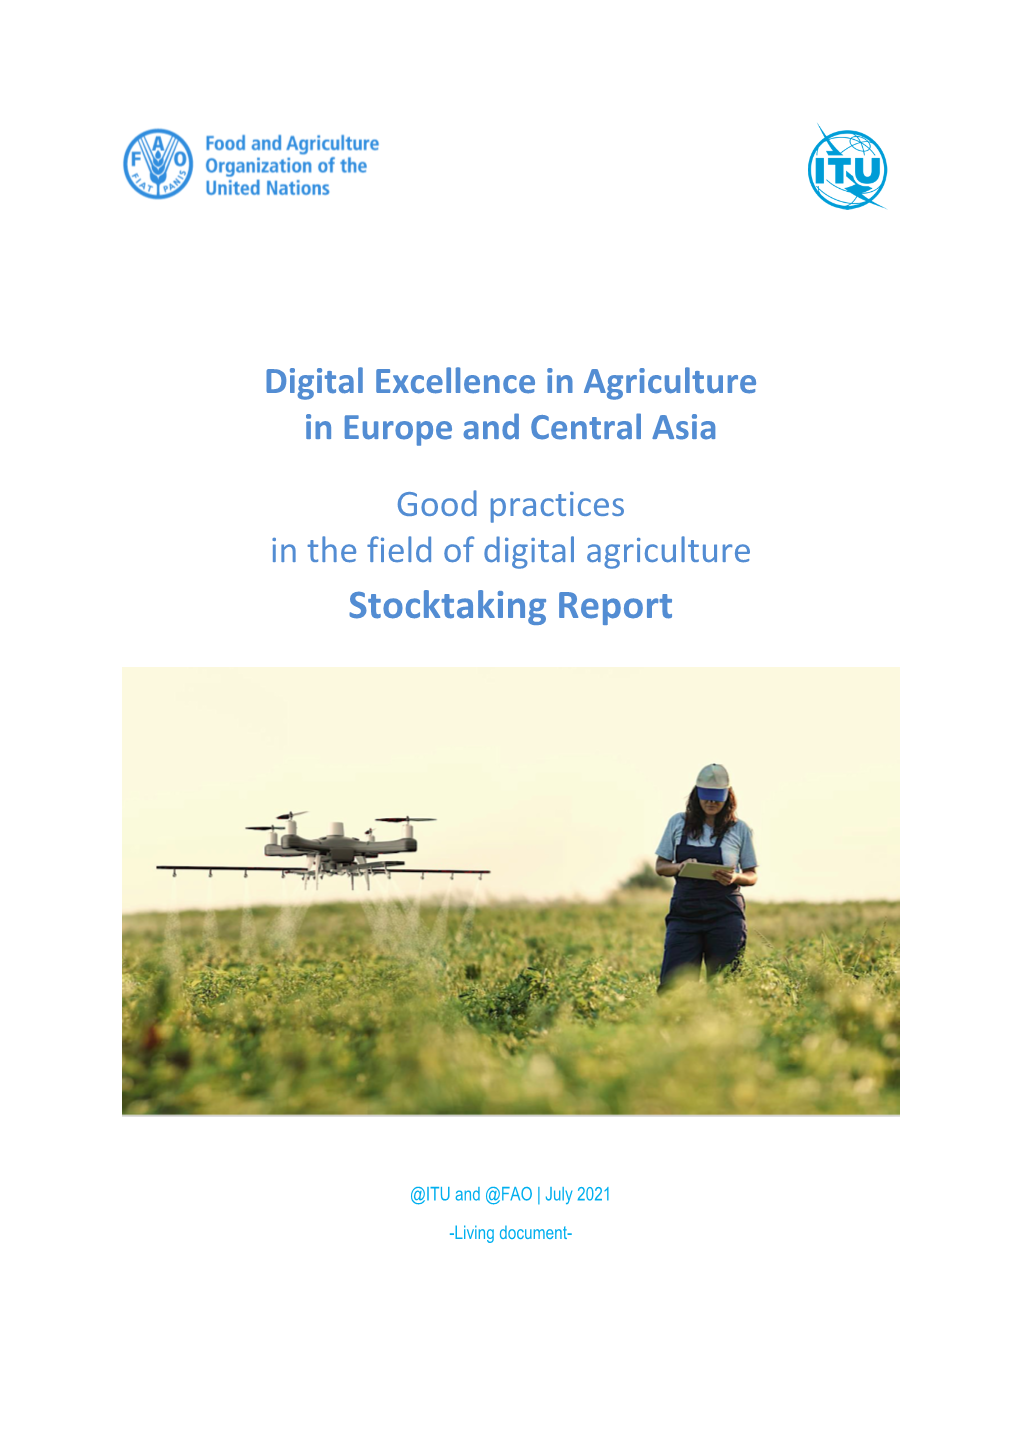 ITU-FAO Stocktaking Report: Digital Excellence in Agriculture in Europe and Central Asia